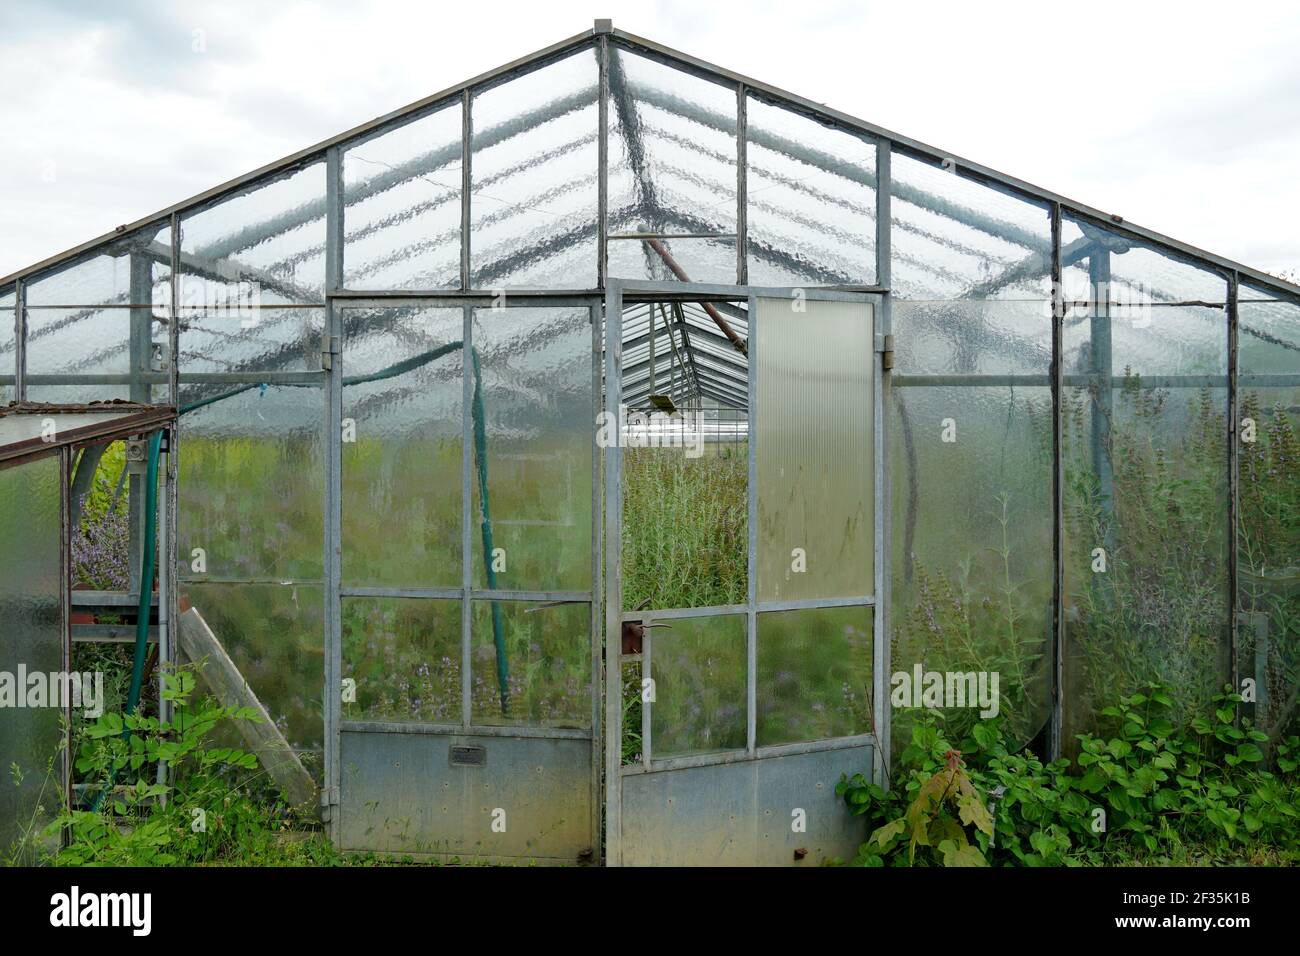 Old large greenhouse for agricultural cultivation, now out of use with some broken glass panes and overgrown with weed and tall grass. Stock Photo